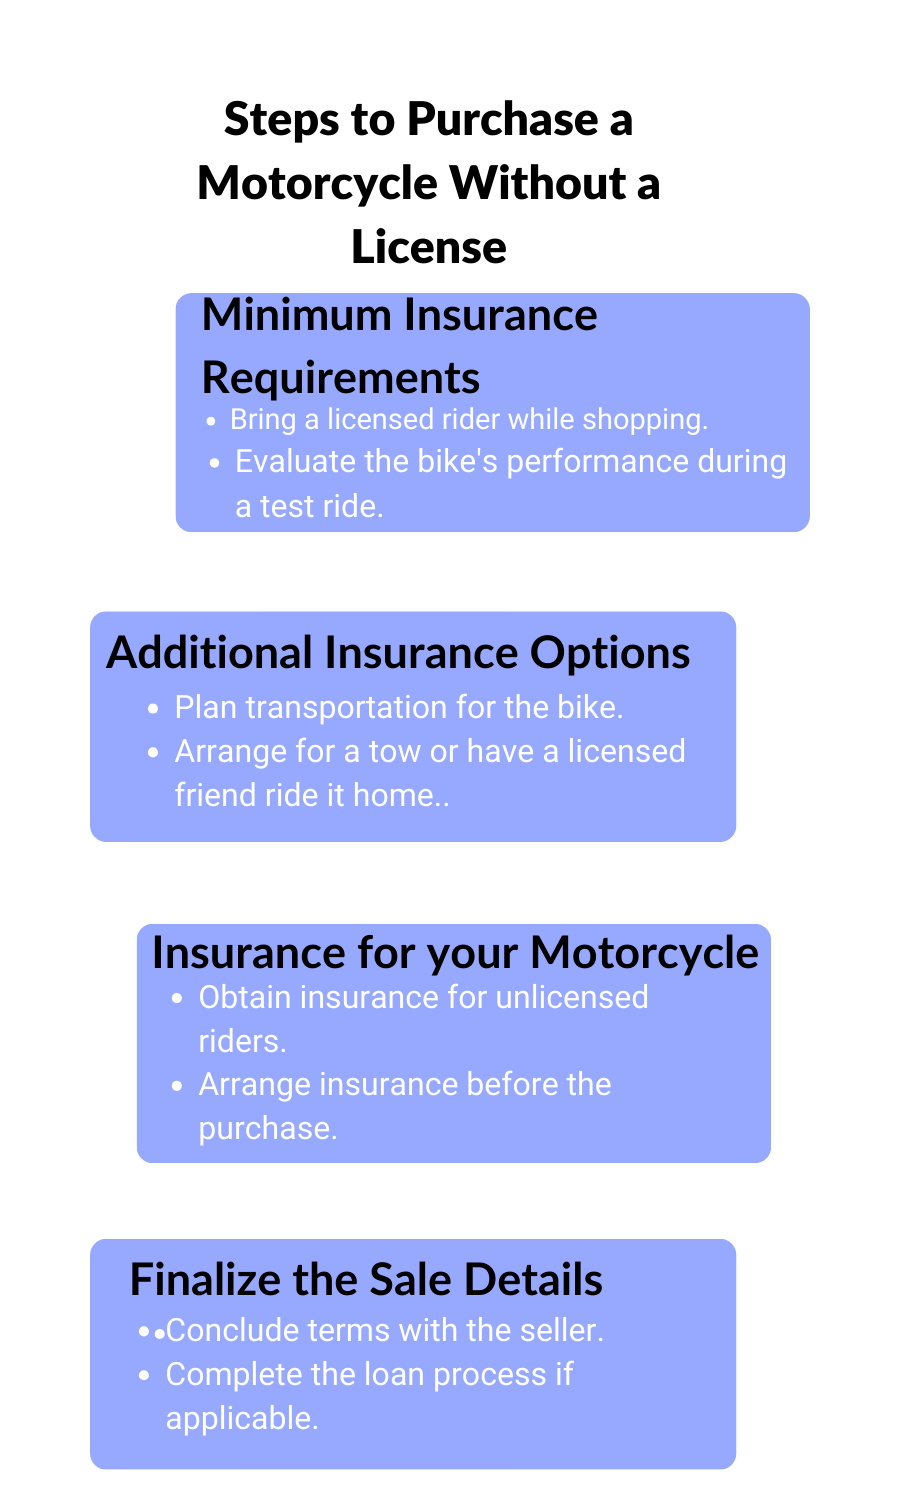 an infographic illustration of Steps to Purchase a Motorcycle Without a License